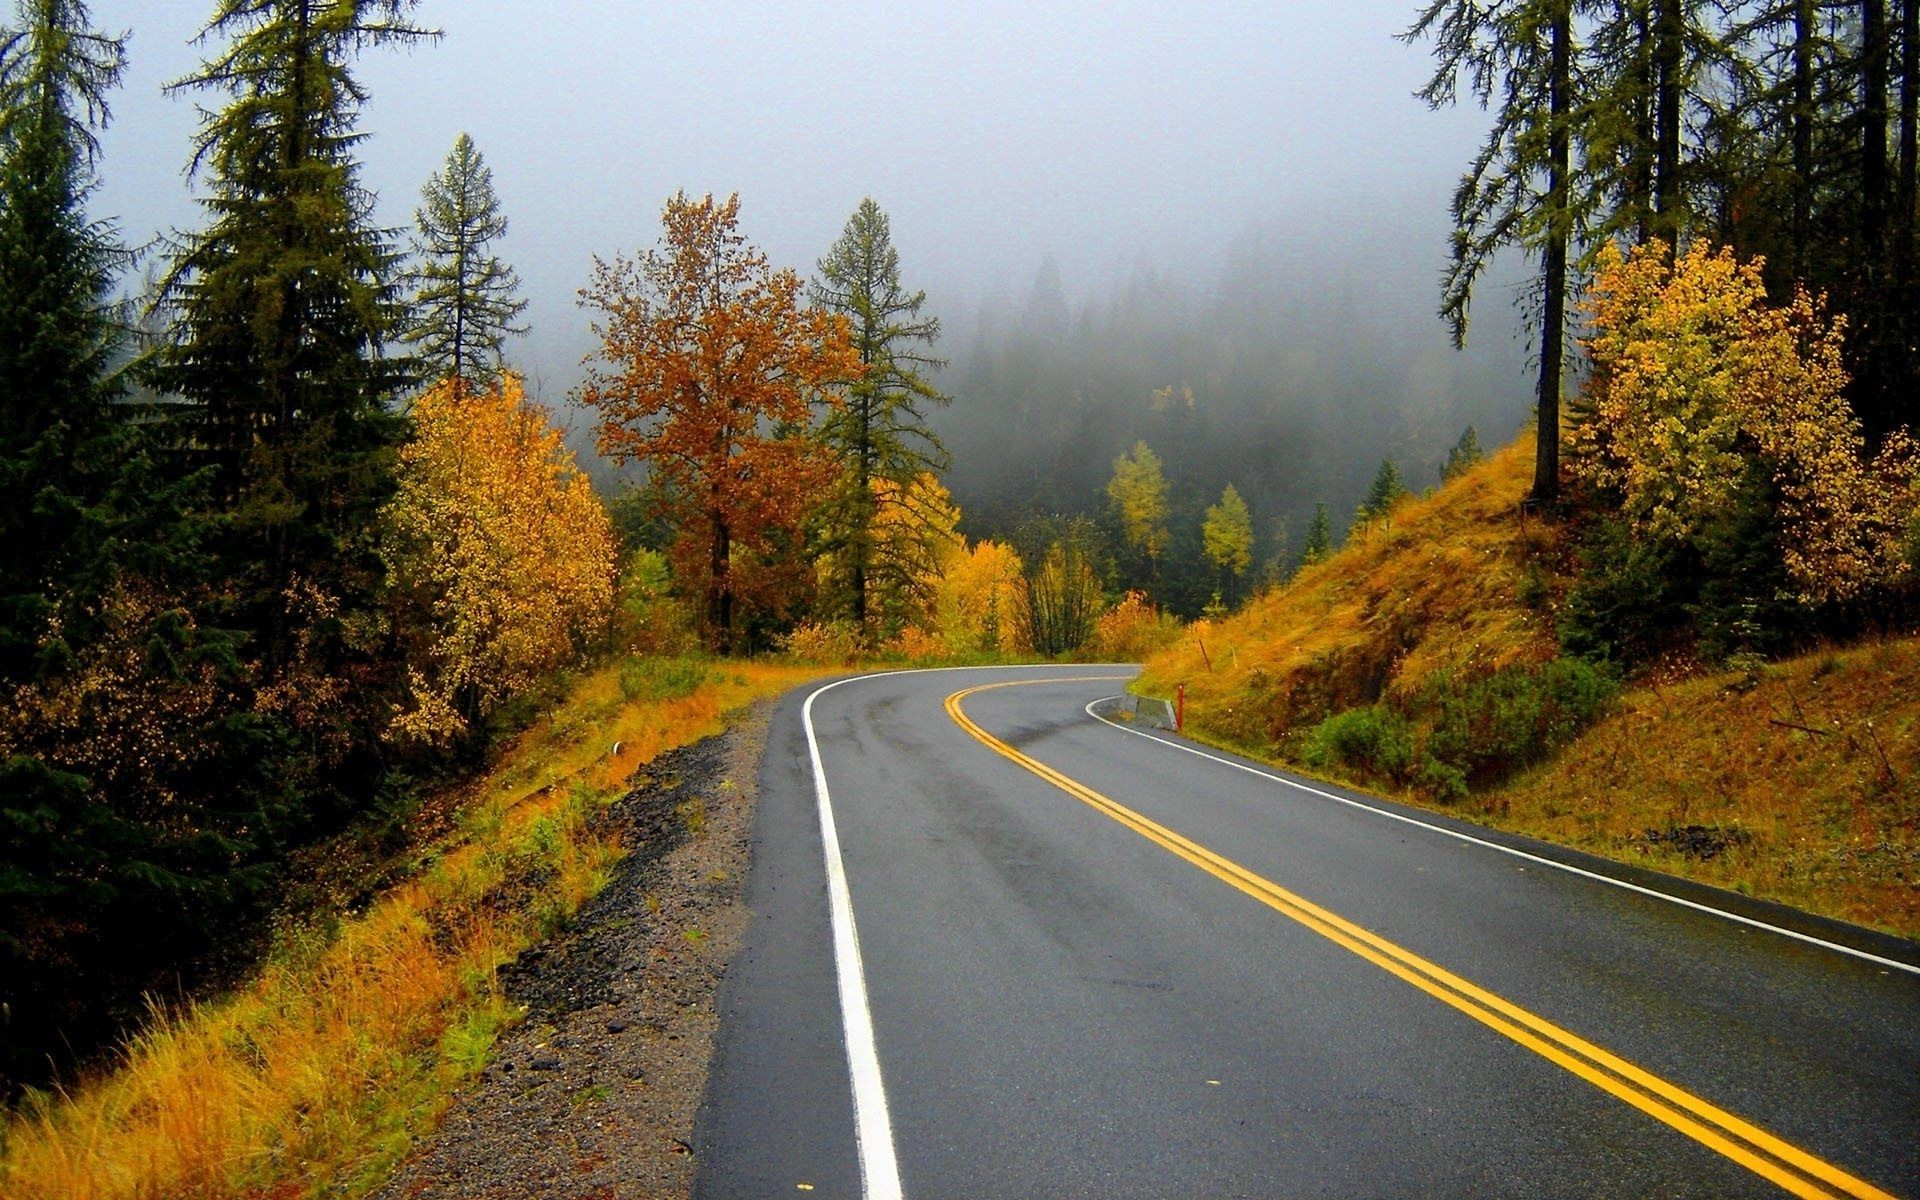 autumn road fall outdoors tree guidance wood nature landscape leaf asphalt travel highway countryside scenic